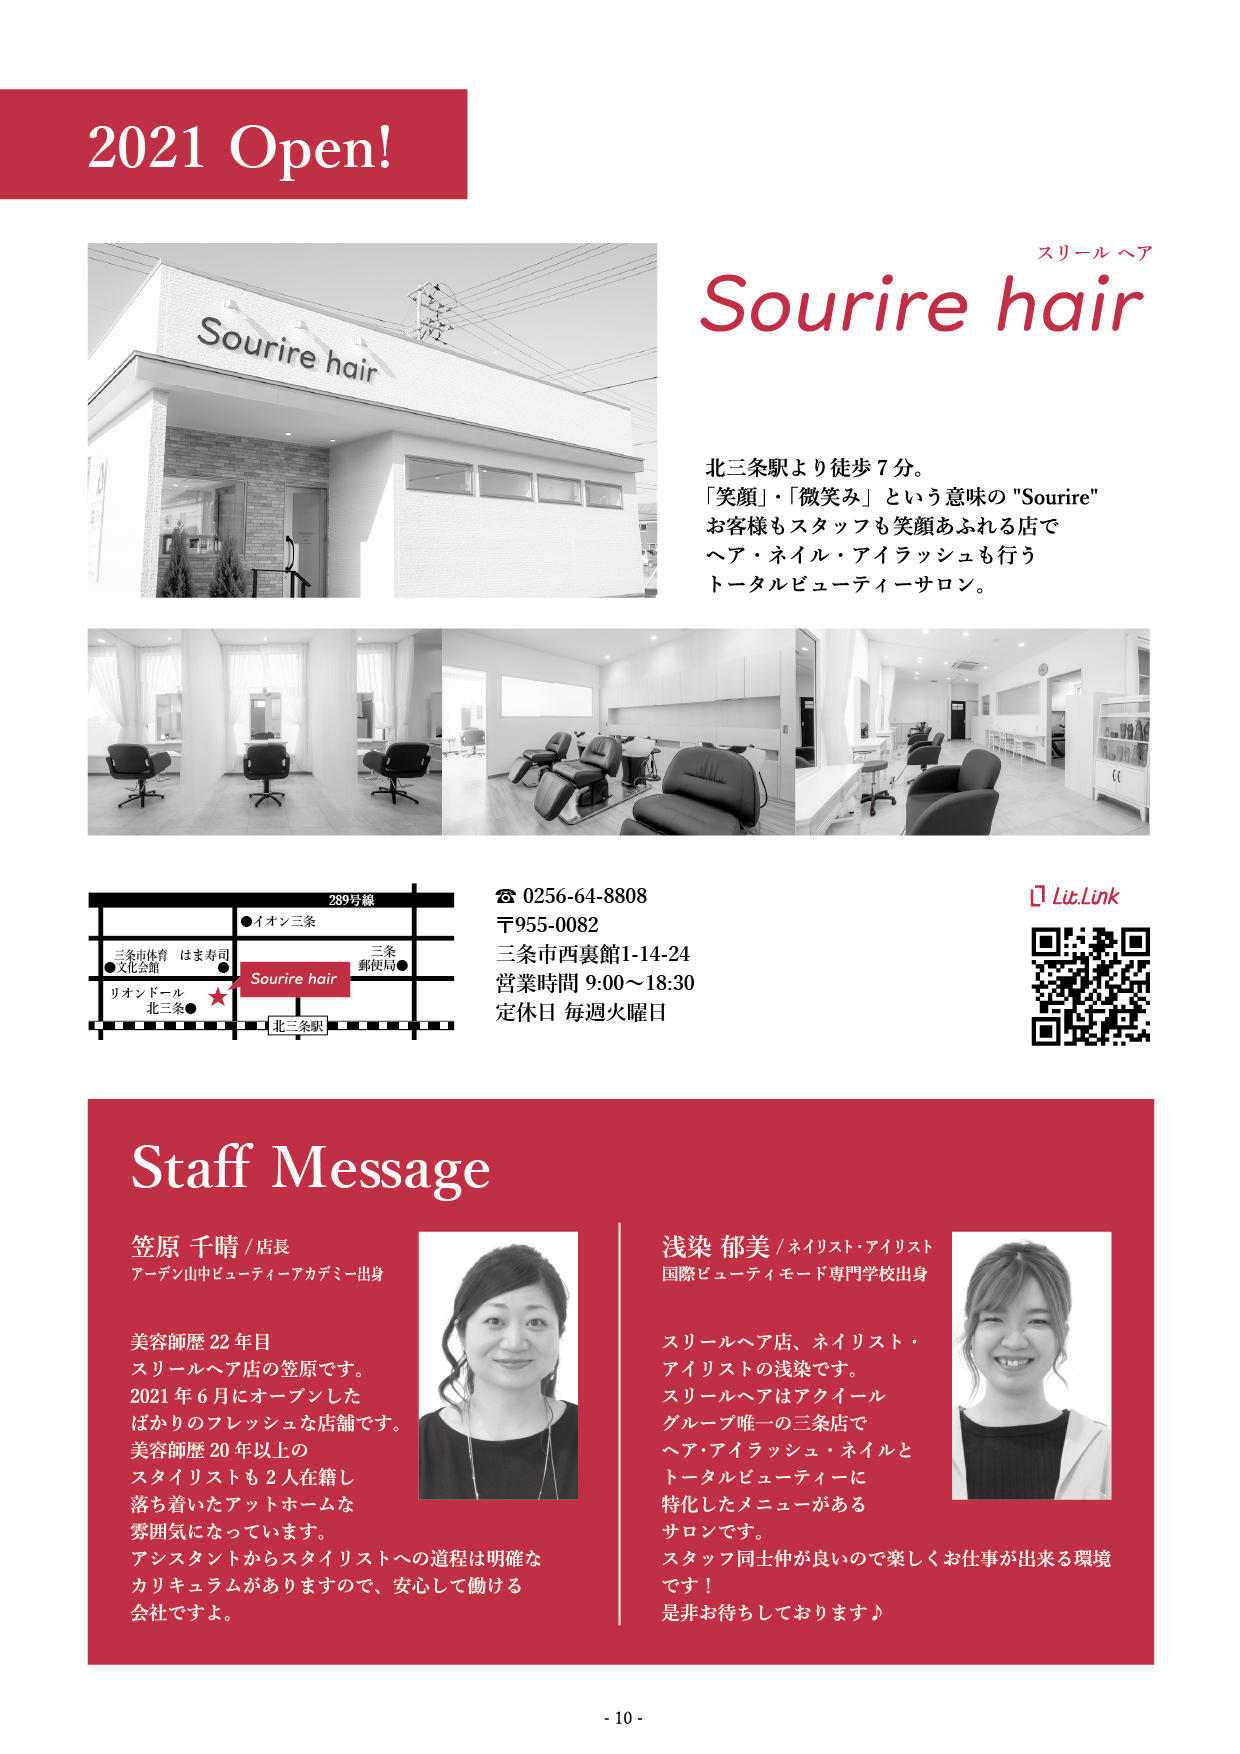 E・Sourire hair（スリールヘア）